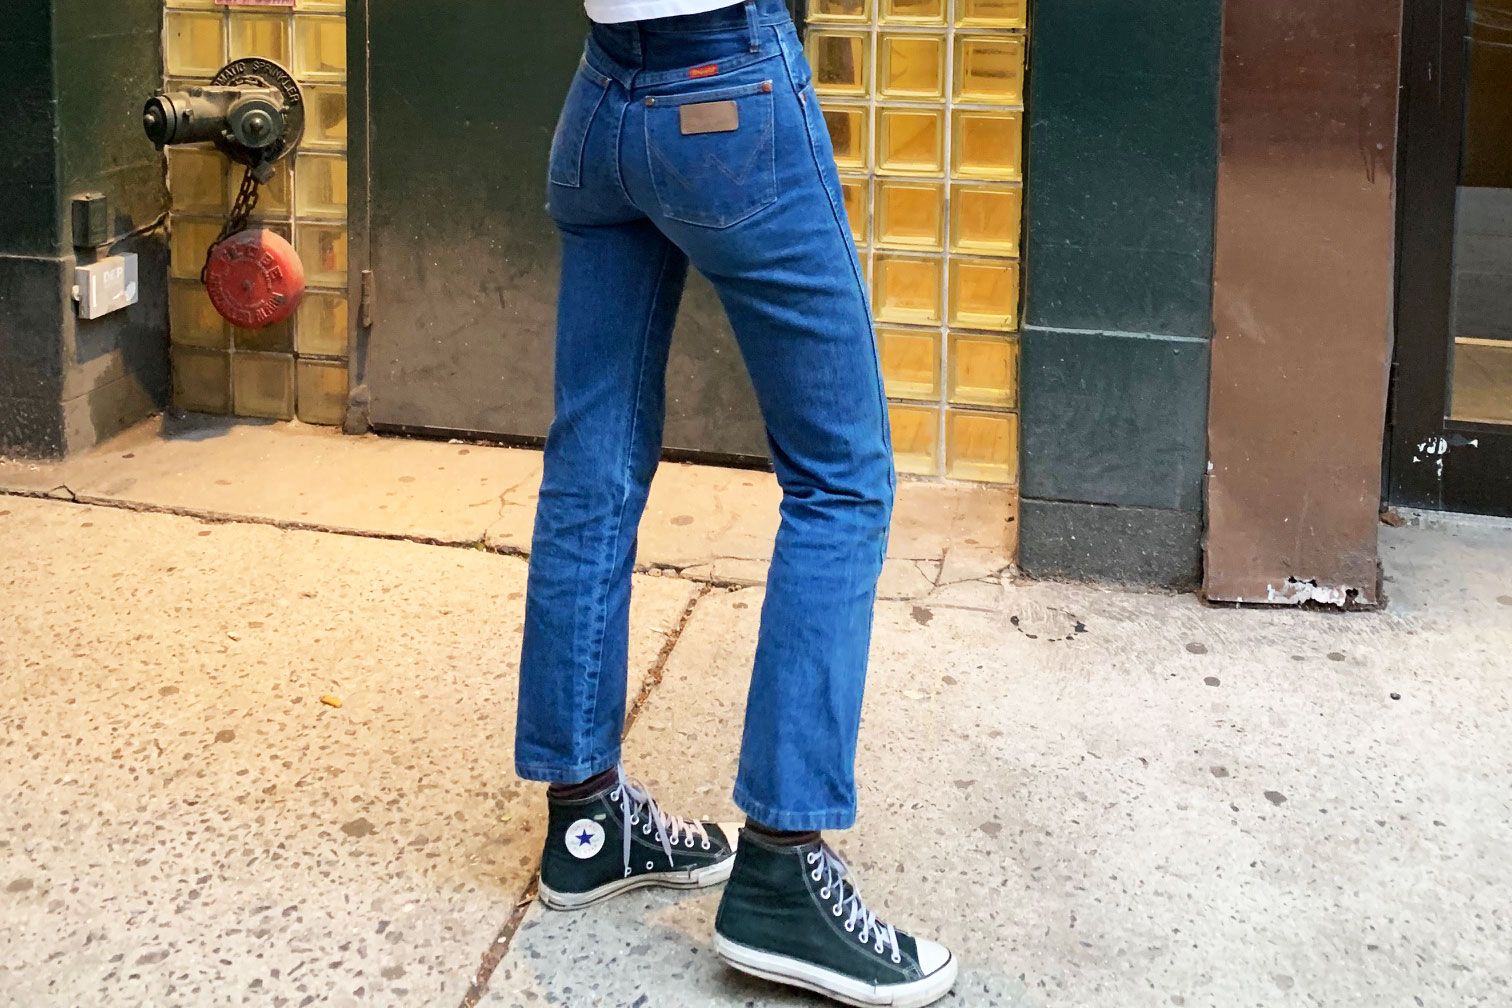 Wrangler Cowboy-Cut Slim-Fit Jeans for Women Review 2021 | The Strategist